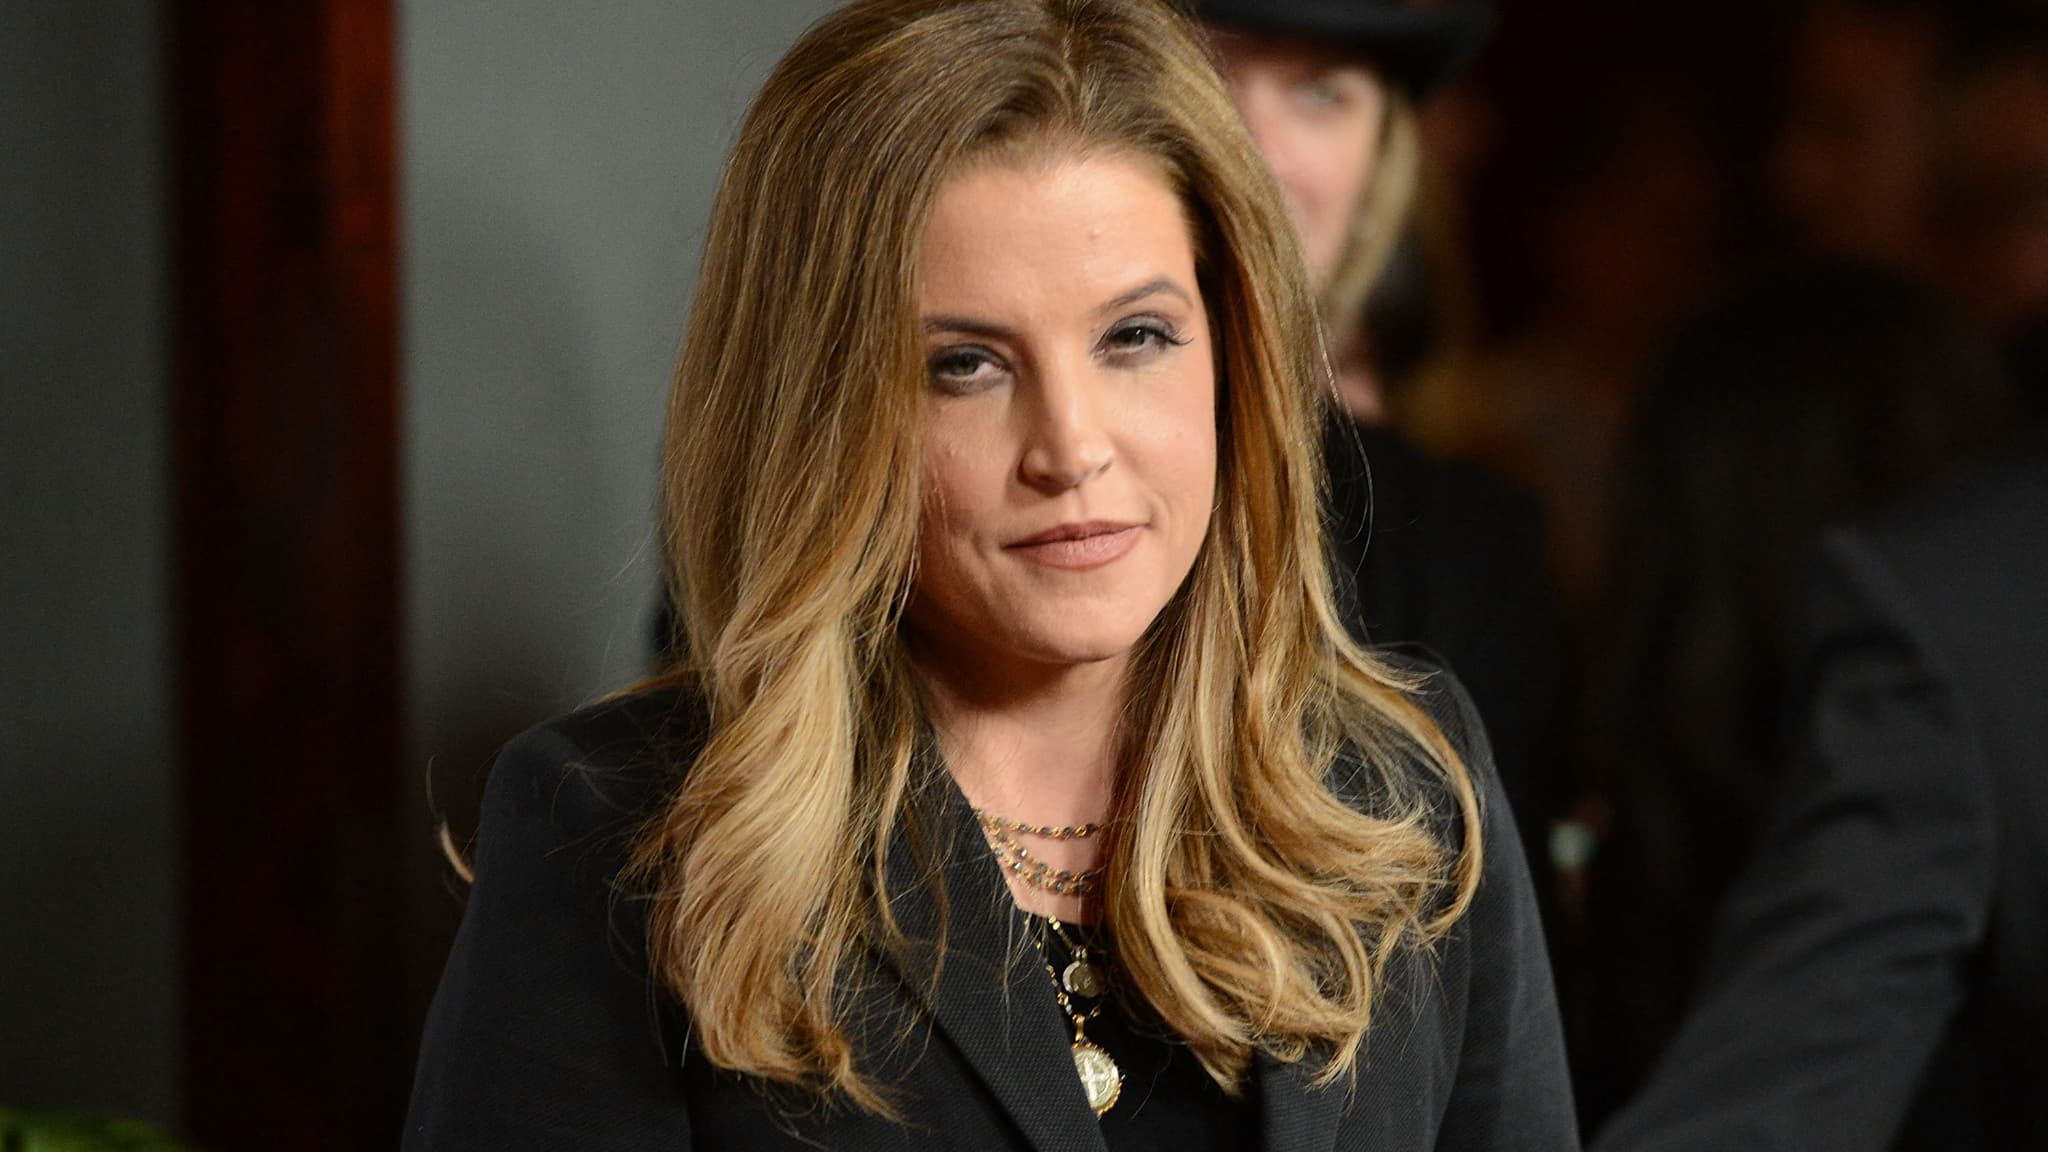 Lisa Marie Presley A Rock N Roll Legacy And Personal Struggles Archyde